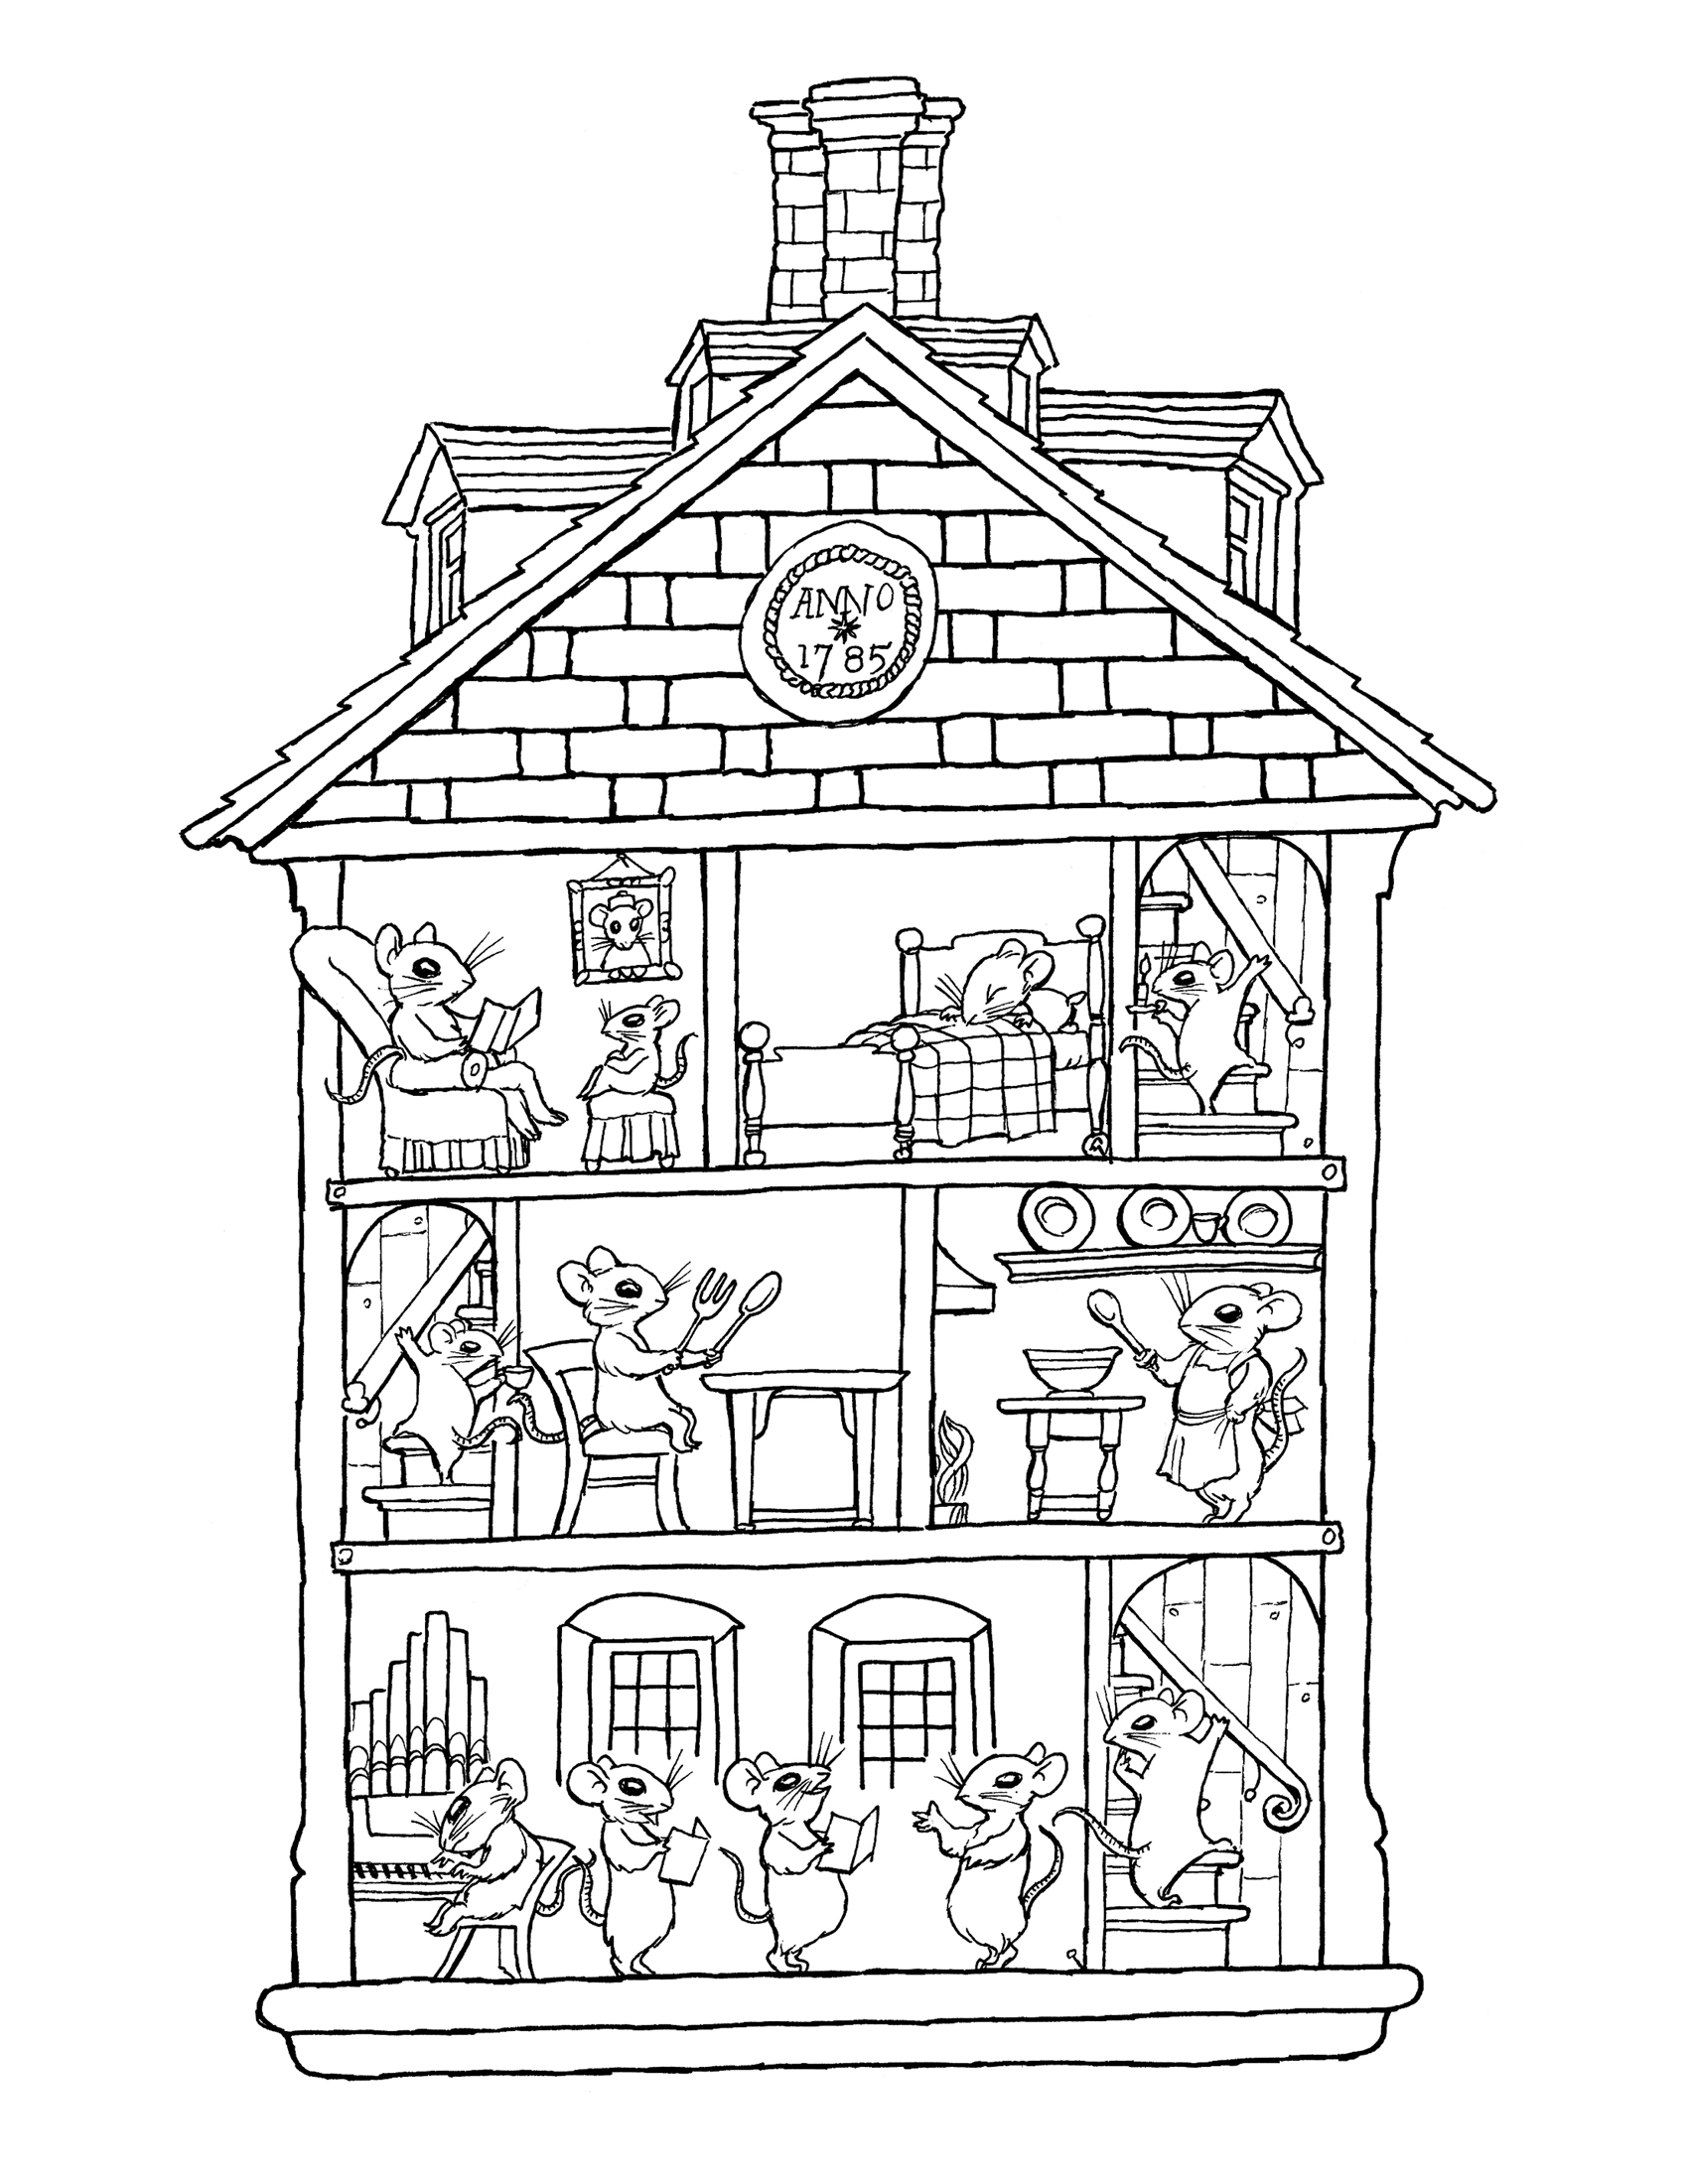 House Coloring Pages For Preschoolers at GetDrawings | Free download